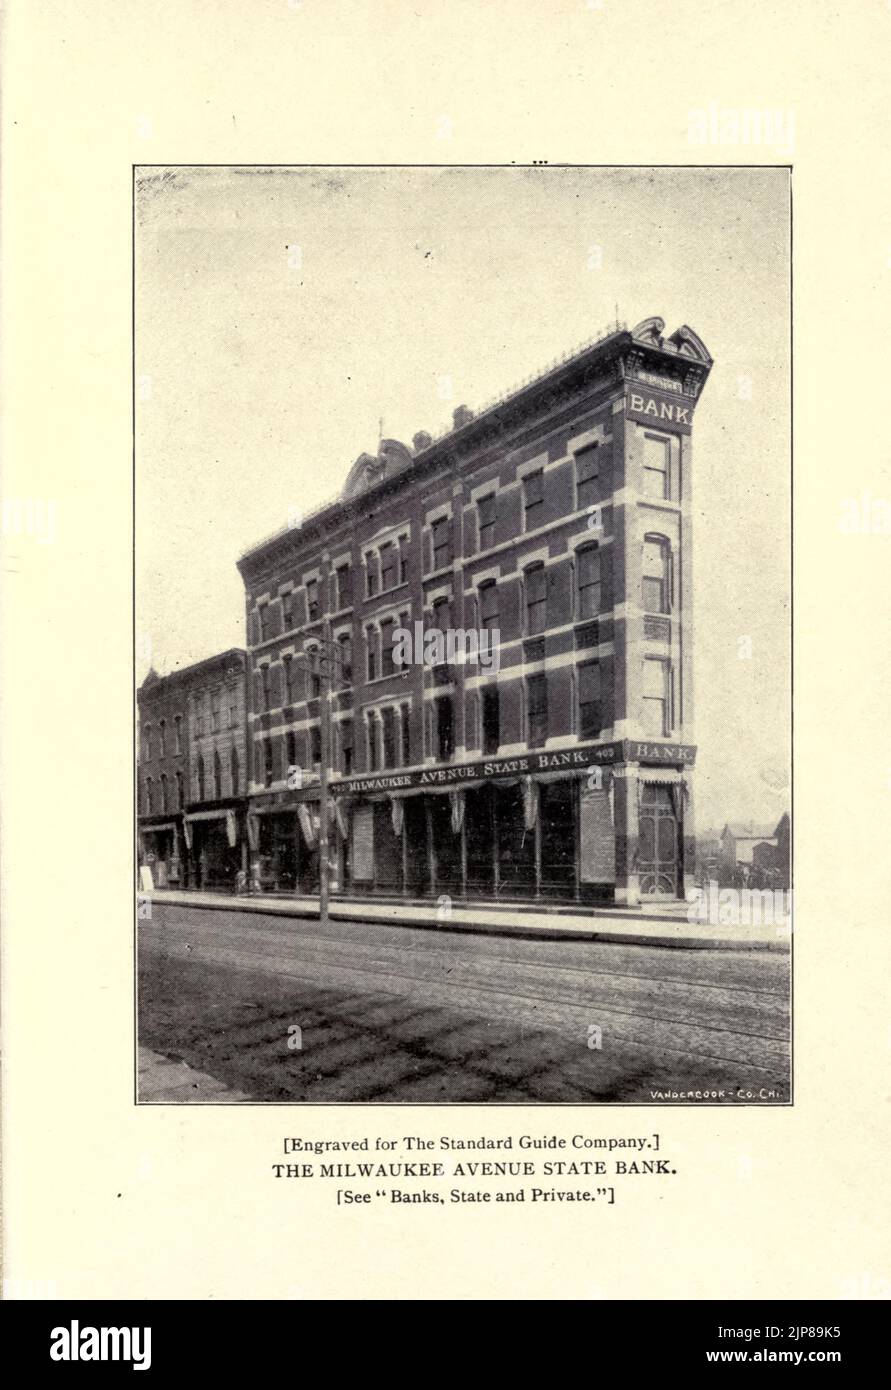 Milwaukee Avenue State Bank Building from the book Chicago, the marvelous city of the West : a history, an encyclopedia and a guide : 1893 : illustrated by John Joseph Flinn, Publisher Chicago : Flinn & Sheppard Stock Photo